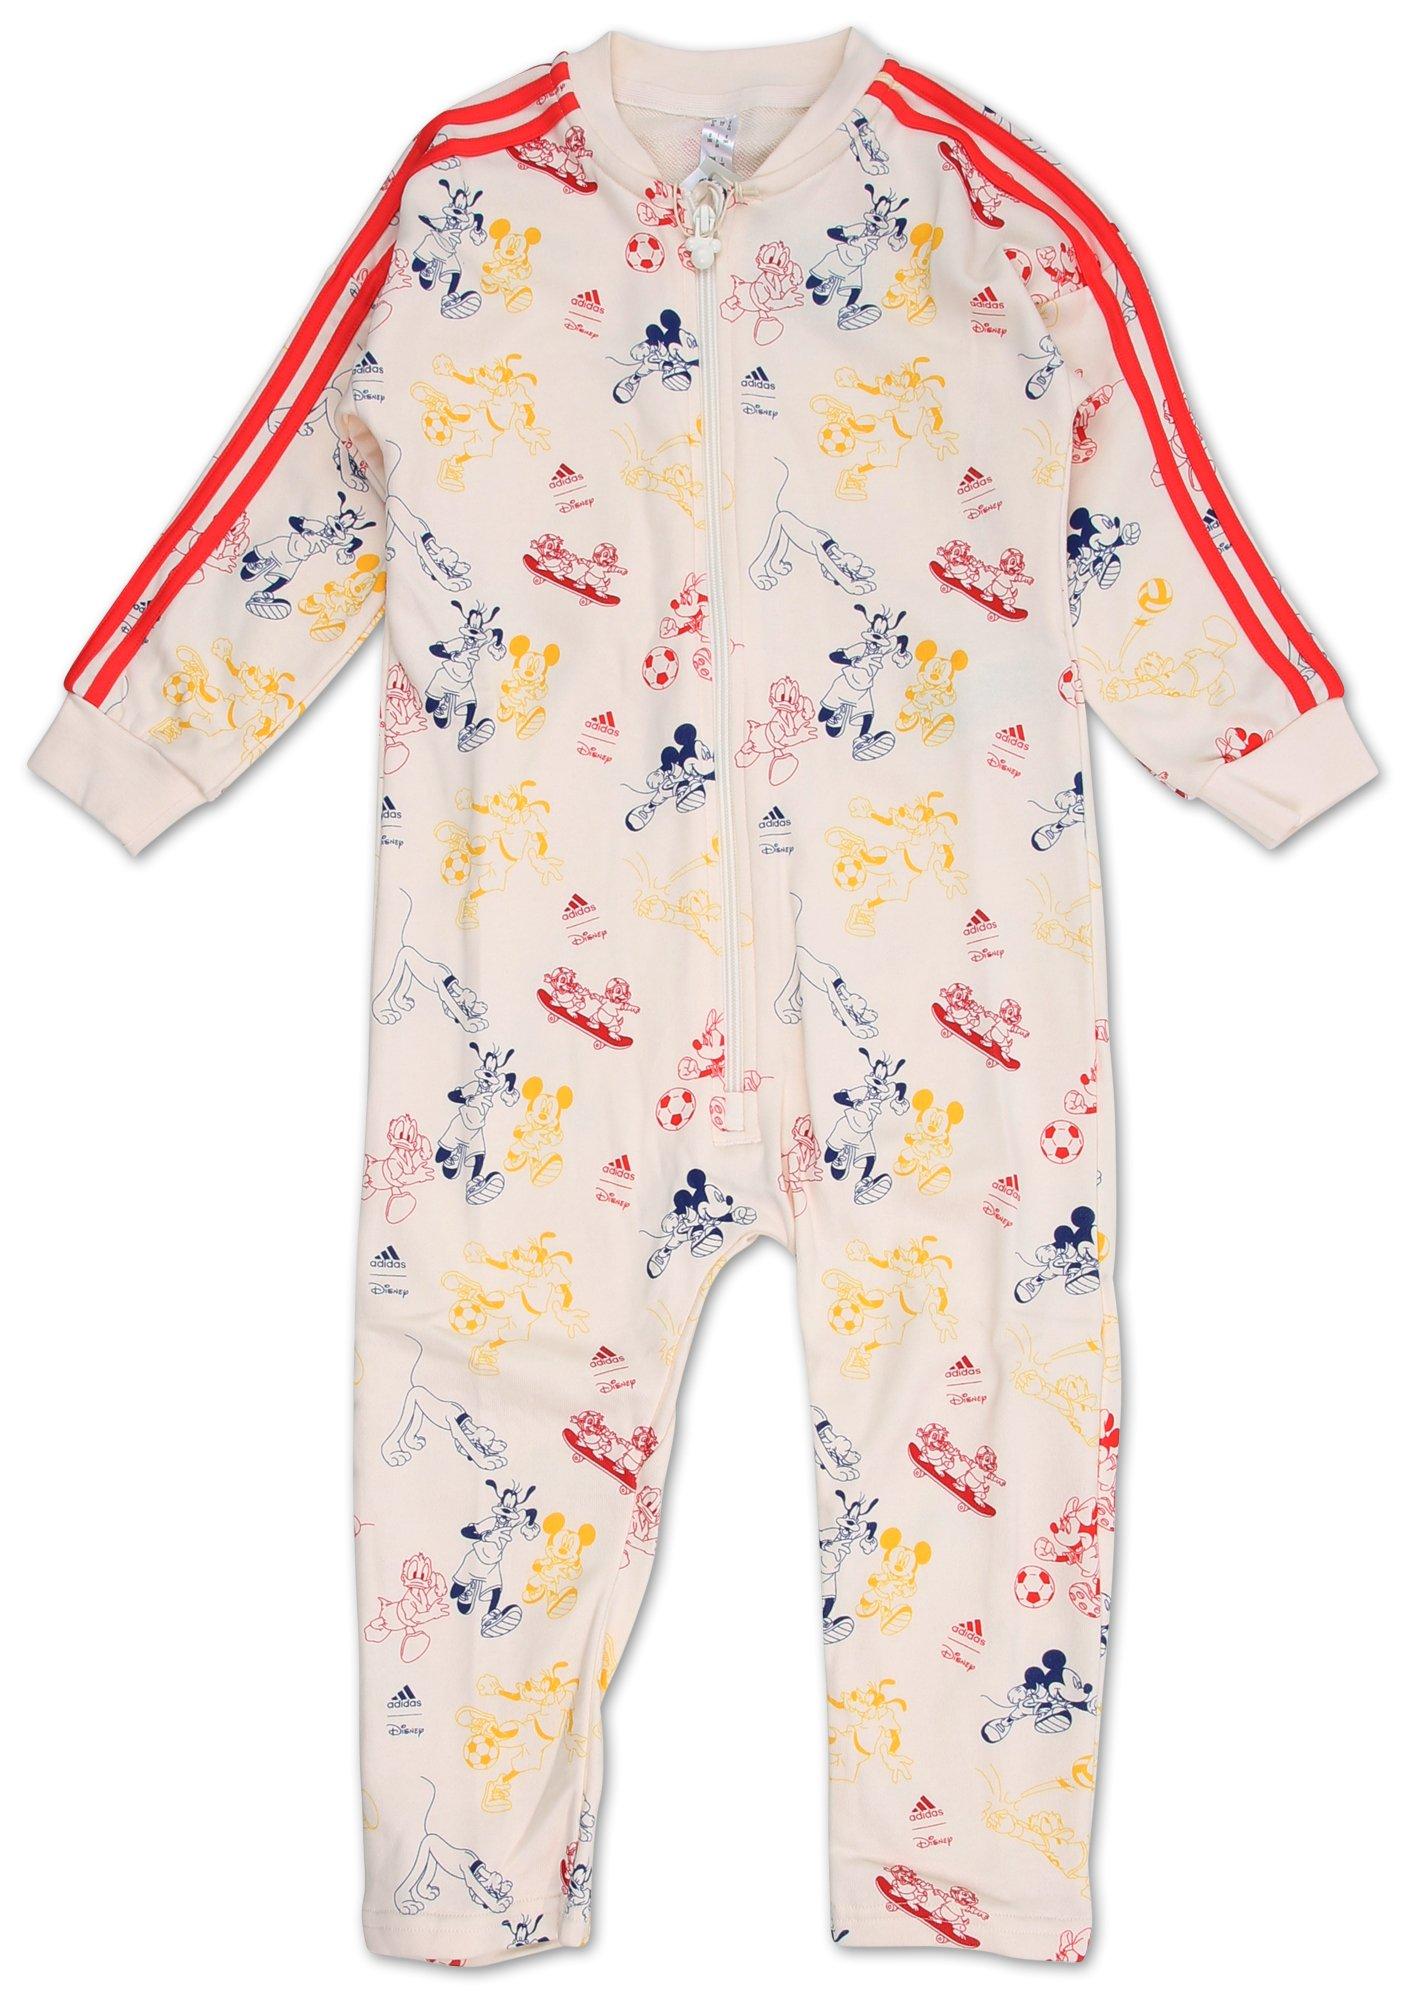 Toddler Boys Mickey and Friends Print Onesie